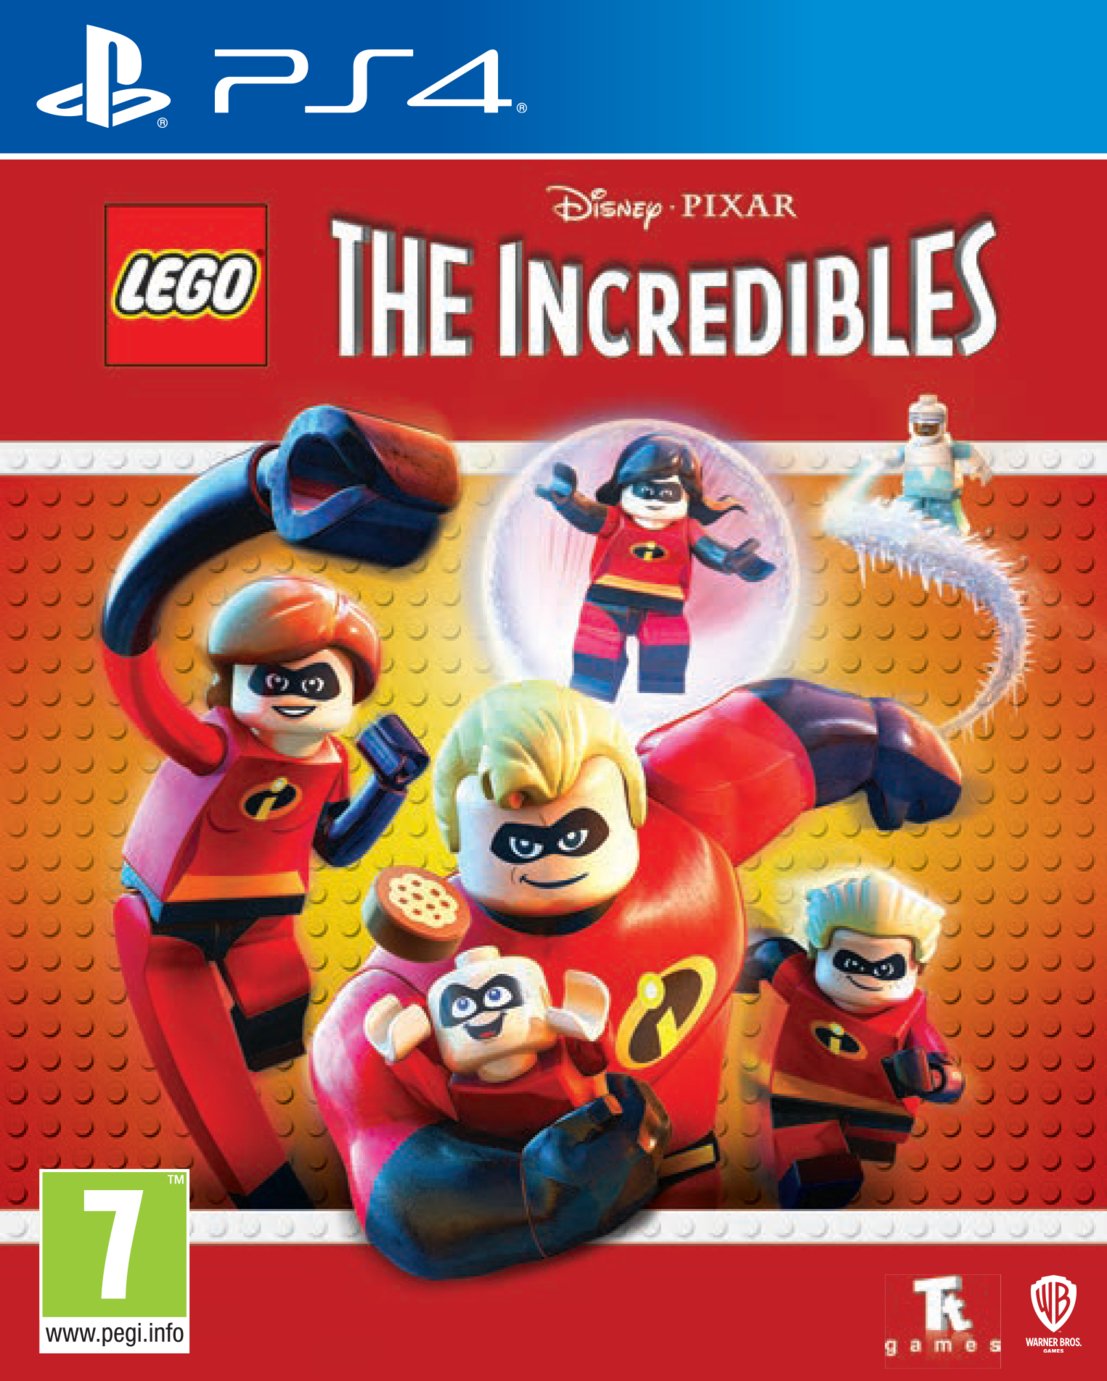 LEGO Incredibles PS4 Game Review